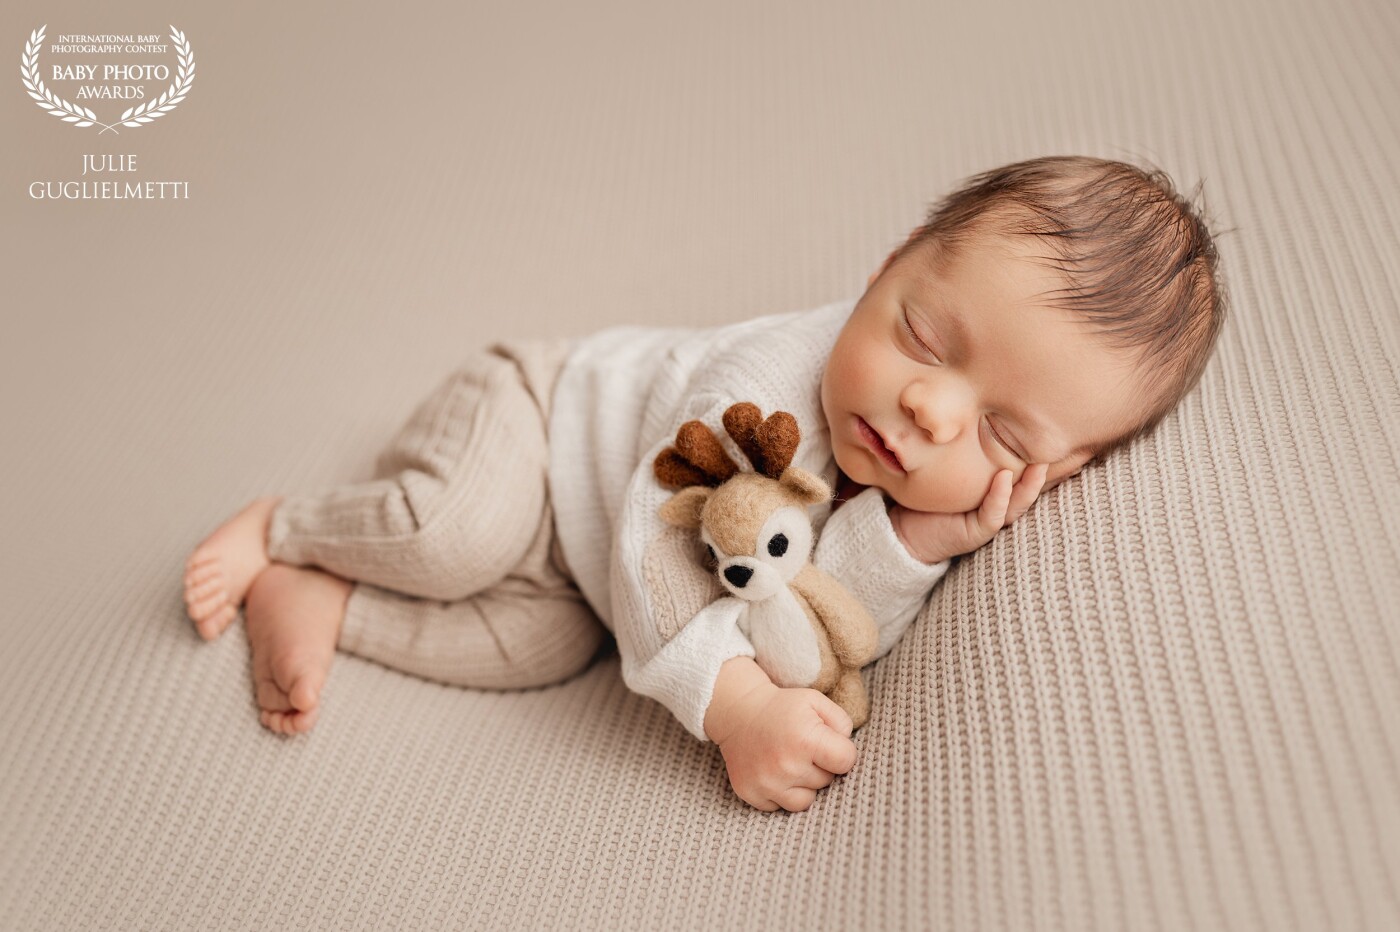 Isn´t a photo of a tiny baby with a little toy just the cutest thing you have ever seen?<br />
This baby boy had his mind set of having his hand in fist so giving him a toy to hold just made for a perfect capture.